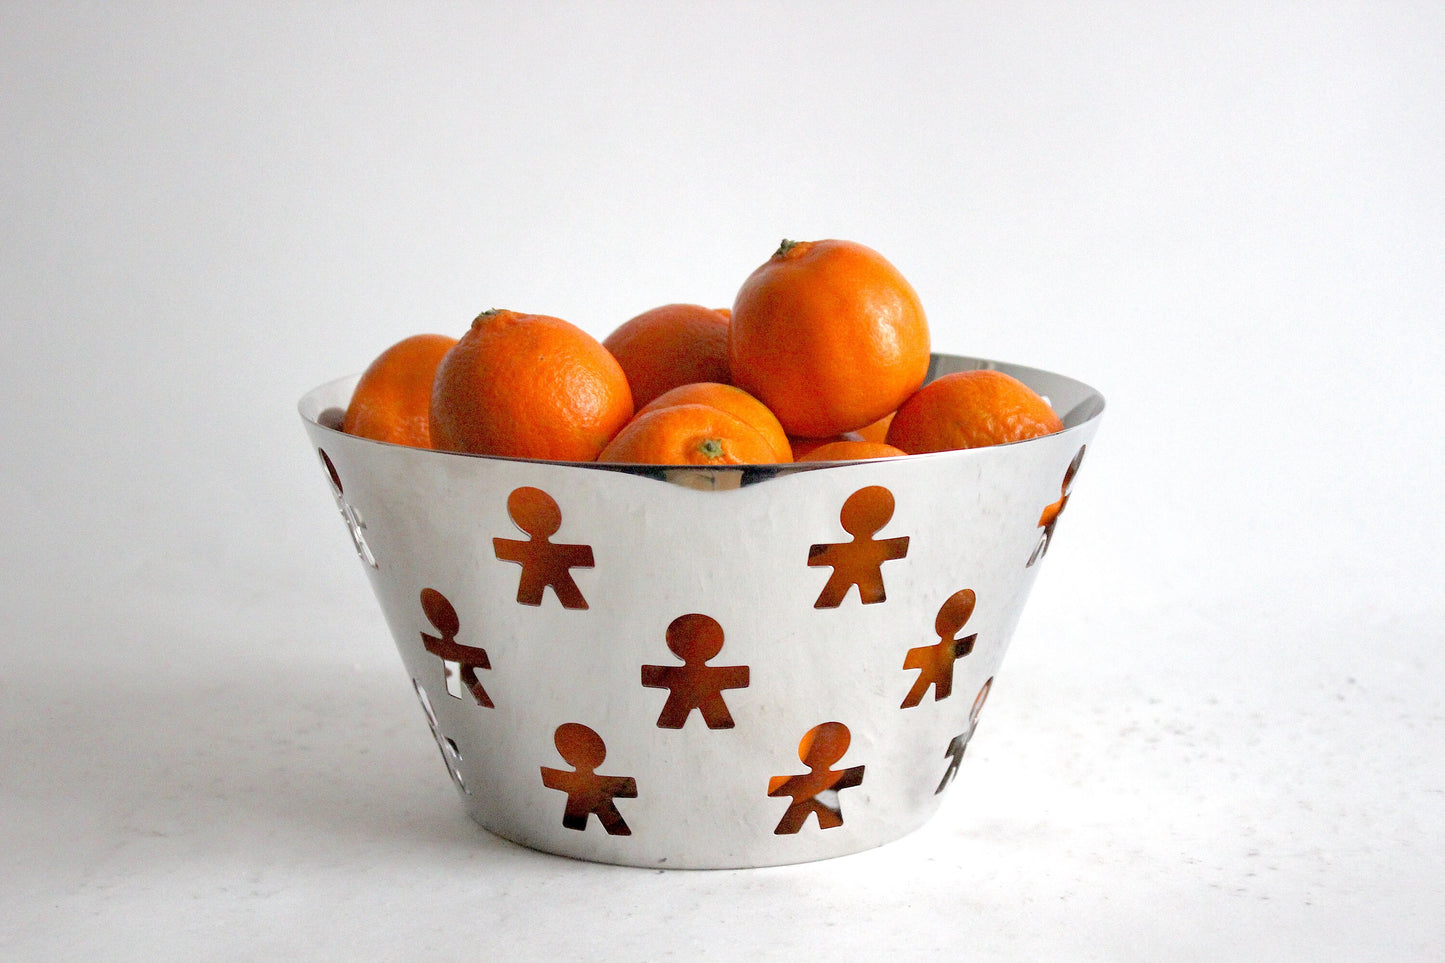 Alessi Girotondo Stainless Steel Fruit Bowl XL. King Kong Design. New old Stock with original Packaging. 18/10 stainless steel. Italy 1980s